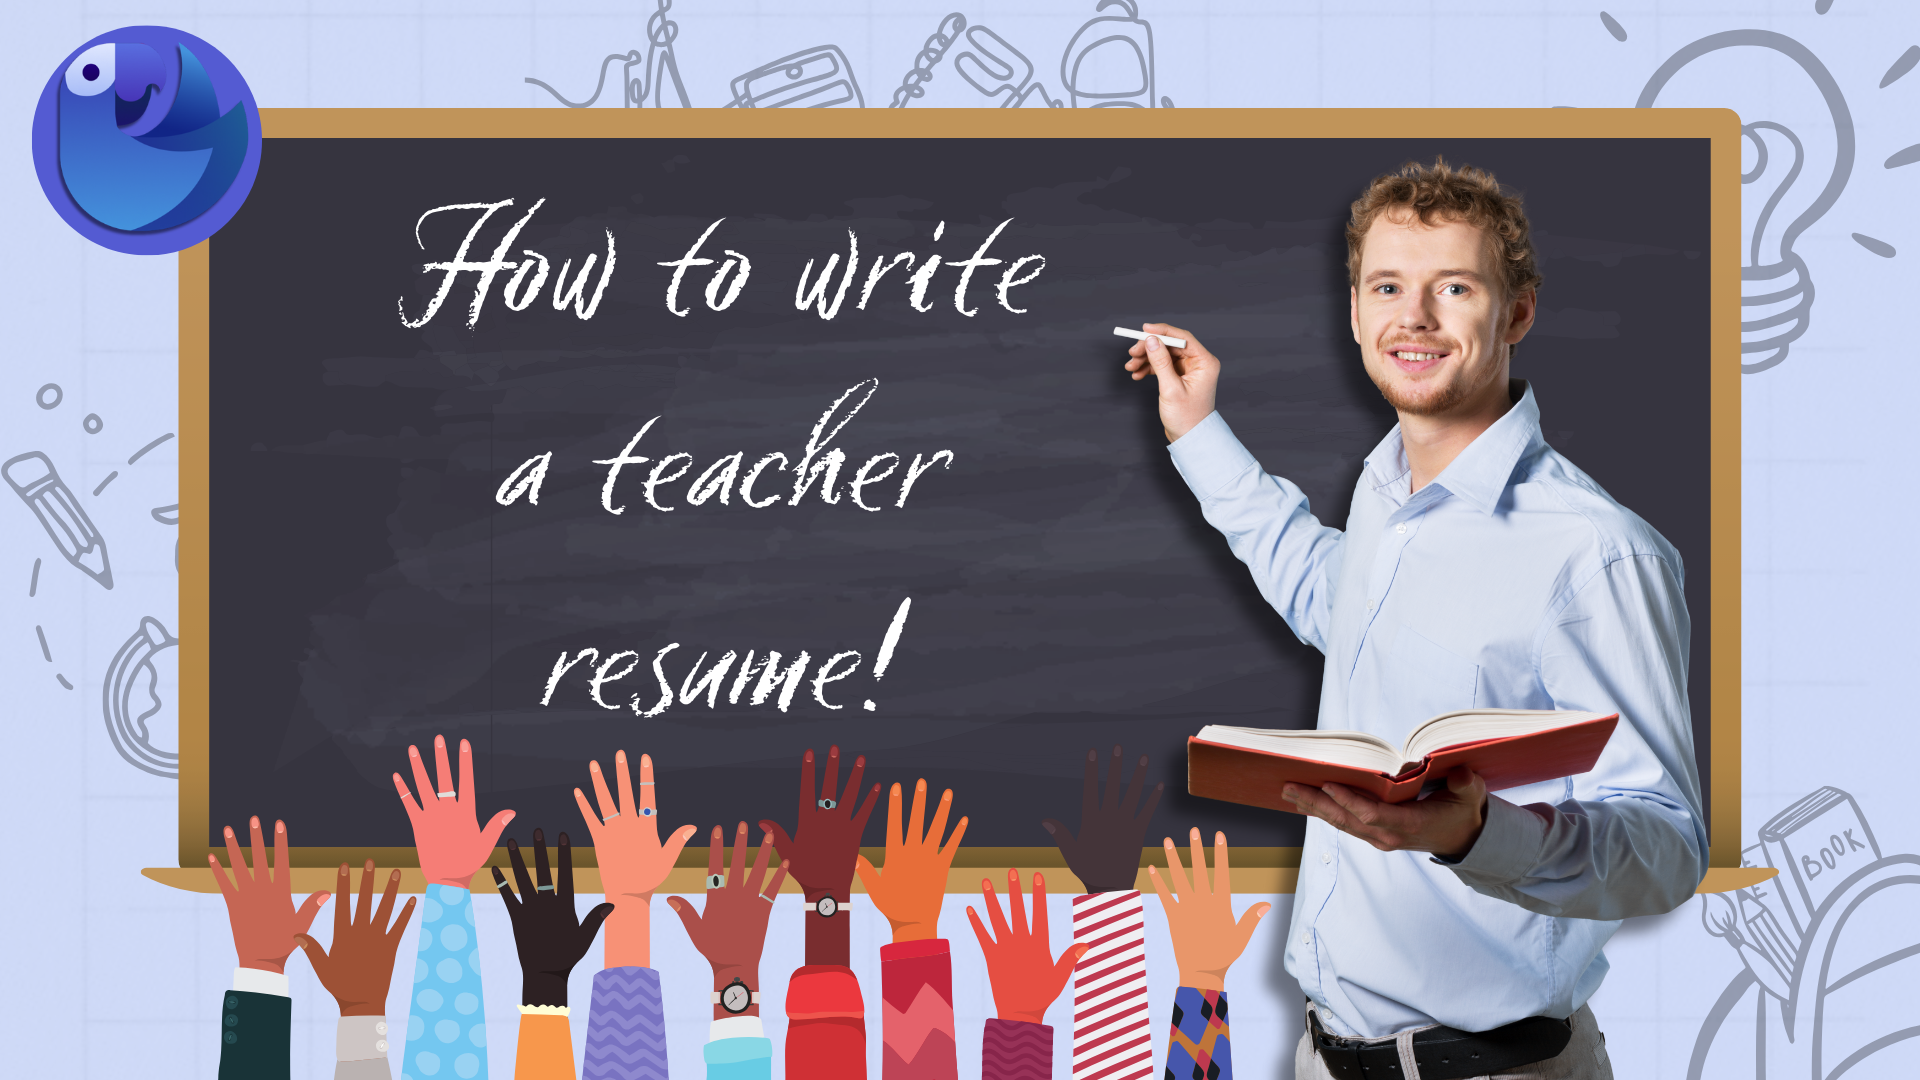 How To Write a Teacher Resume: A Guide for You So You Can Guide Them featured image